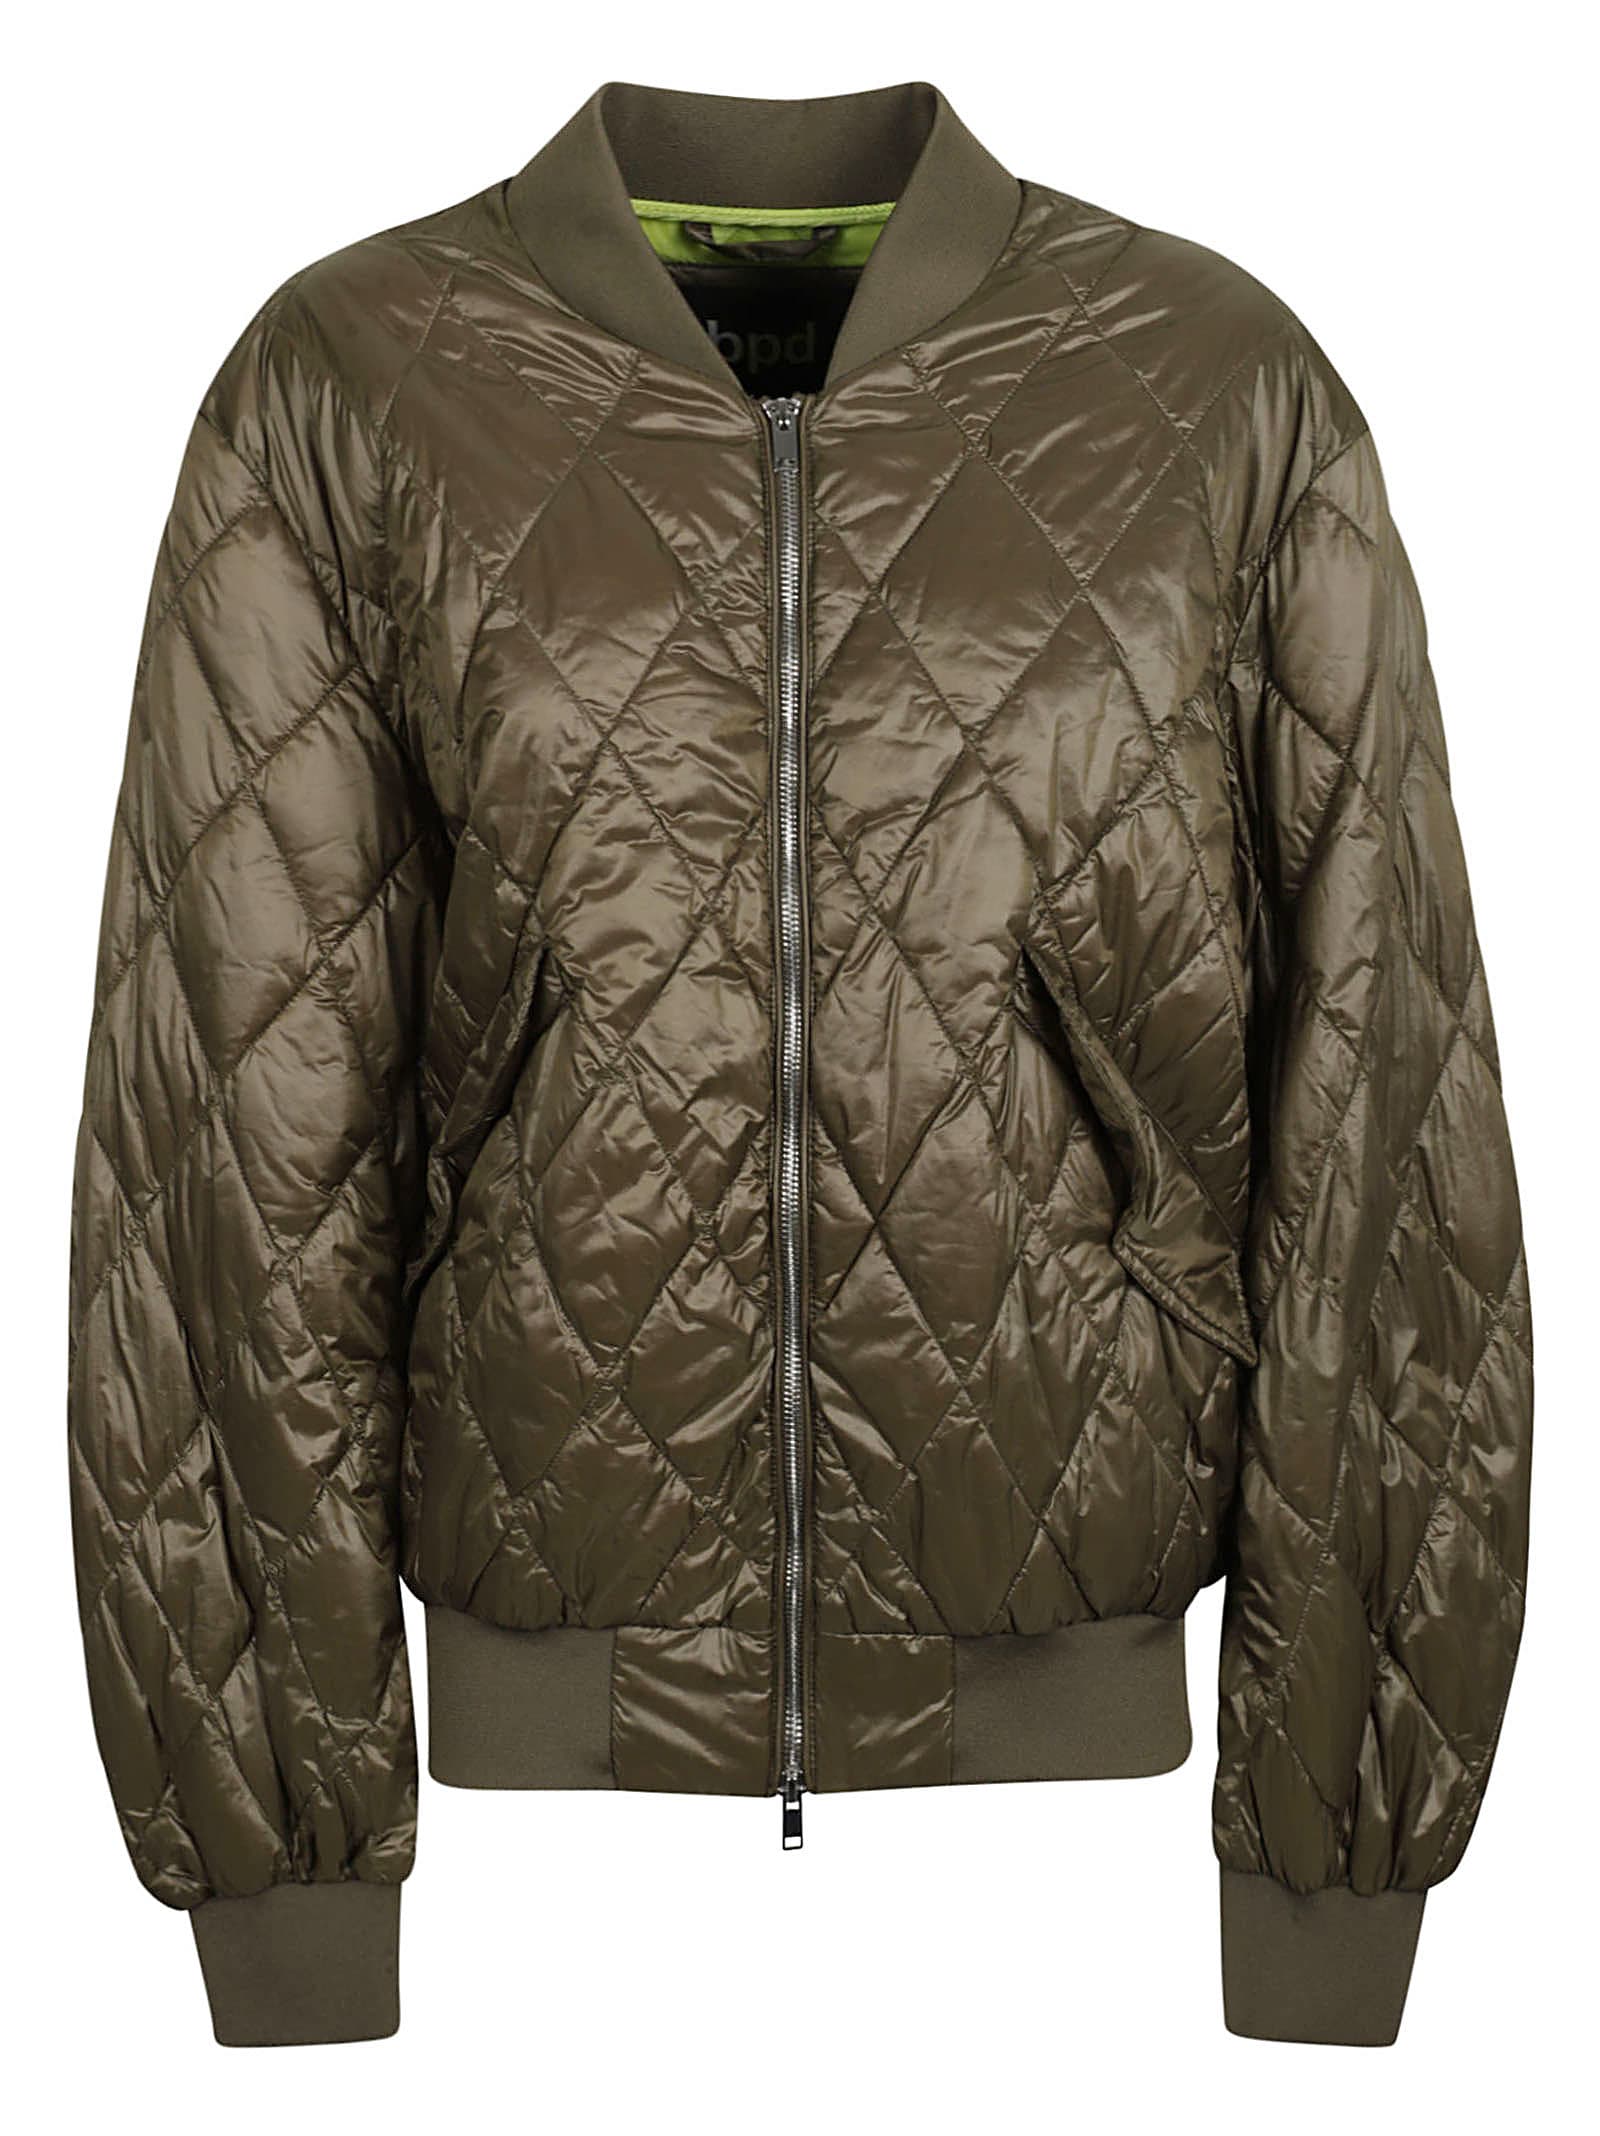 Bpd (Be Proud of this stress) Diamond Quilted Zipped Jacket